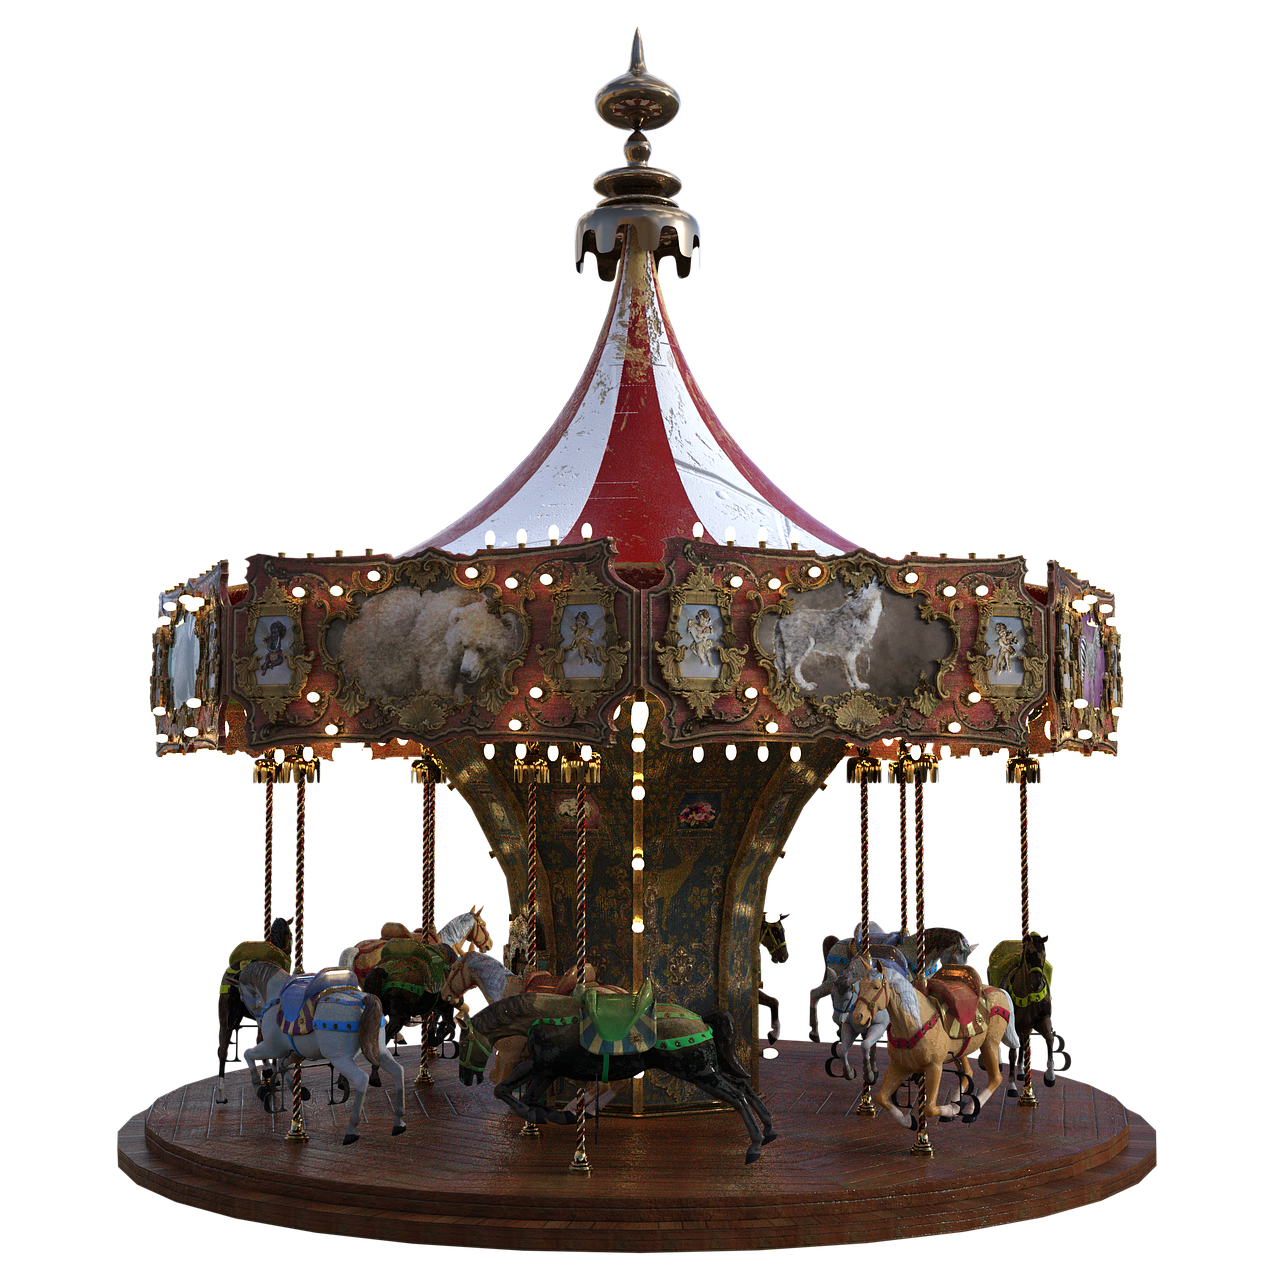 a merry merry merry merry merry merry merry merry merry merry merry merry merry merry merry merry merry, a digital rendering, by Artur Tarnowski, polycount contest winner, baroque, carousel, highly detailed hyper real retro, full front view, restored photo